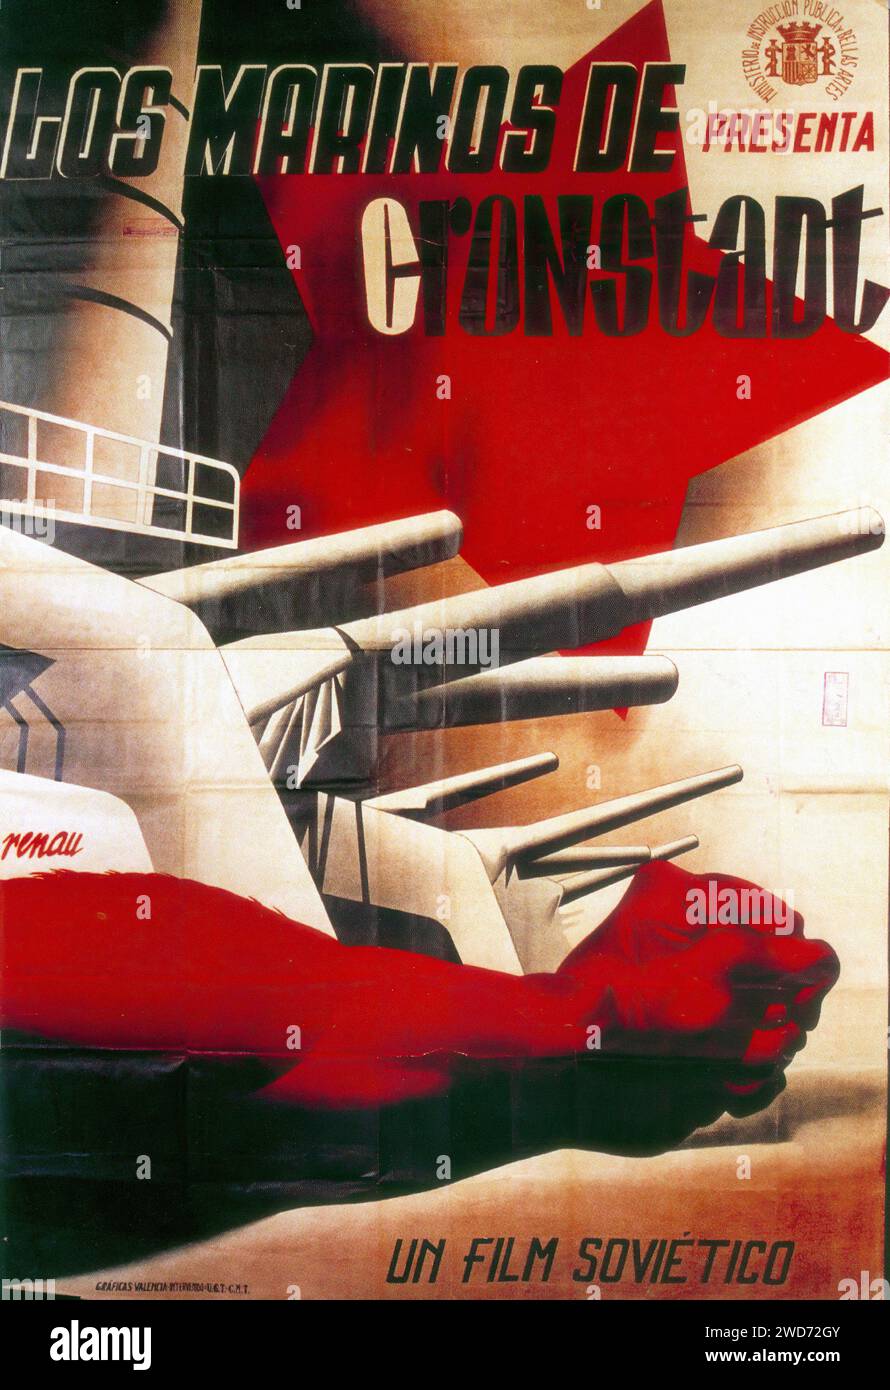 'The sailors of Kronstadt 1937 '  work depicts the sailors of the Kronstadt rebellion, showcasing the naval power and revolutionary fervor. The poster combines elements of Soviet constructivism with bold reds and sharp angles. Keywords: Josep Renau; - Spanish Civil War (Guerra Civil Española) Propaganda Poster Stock Photo